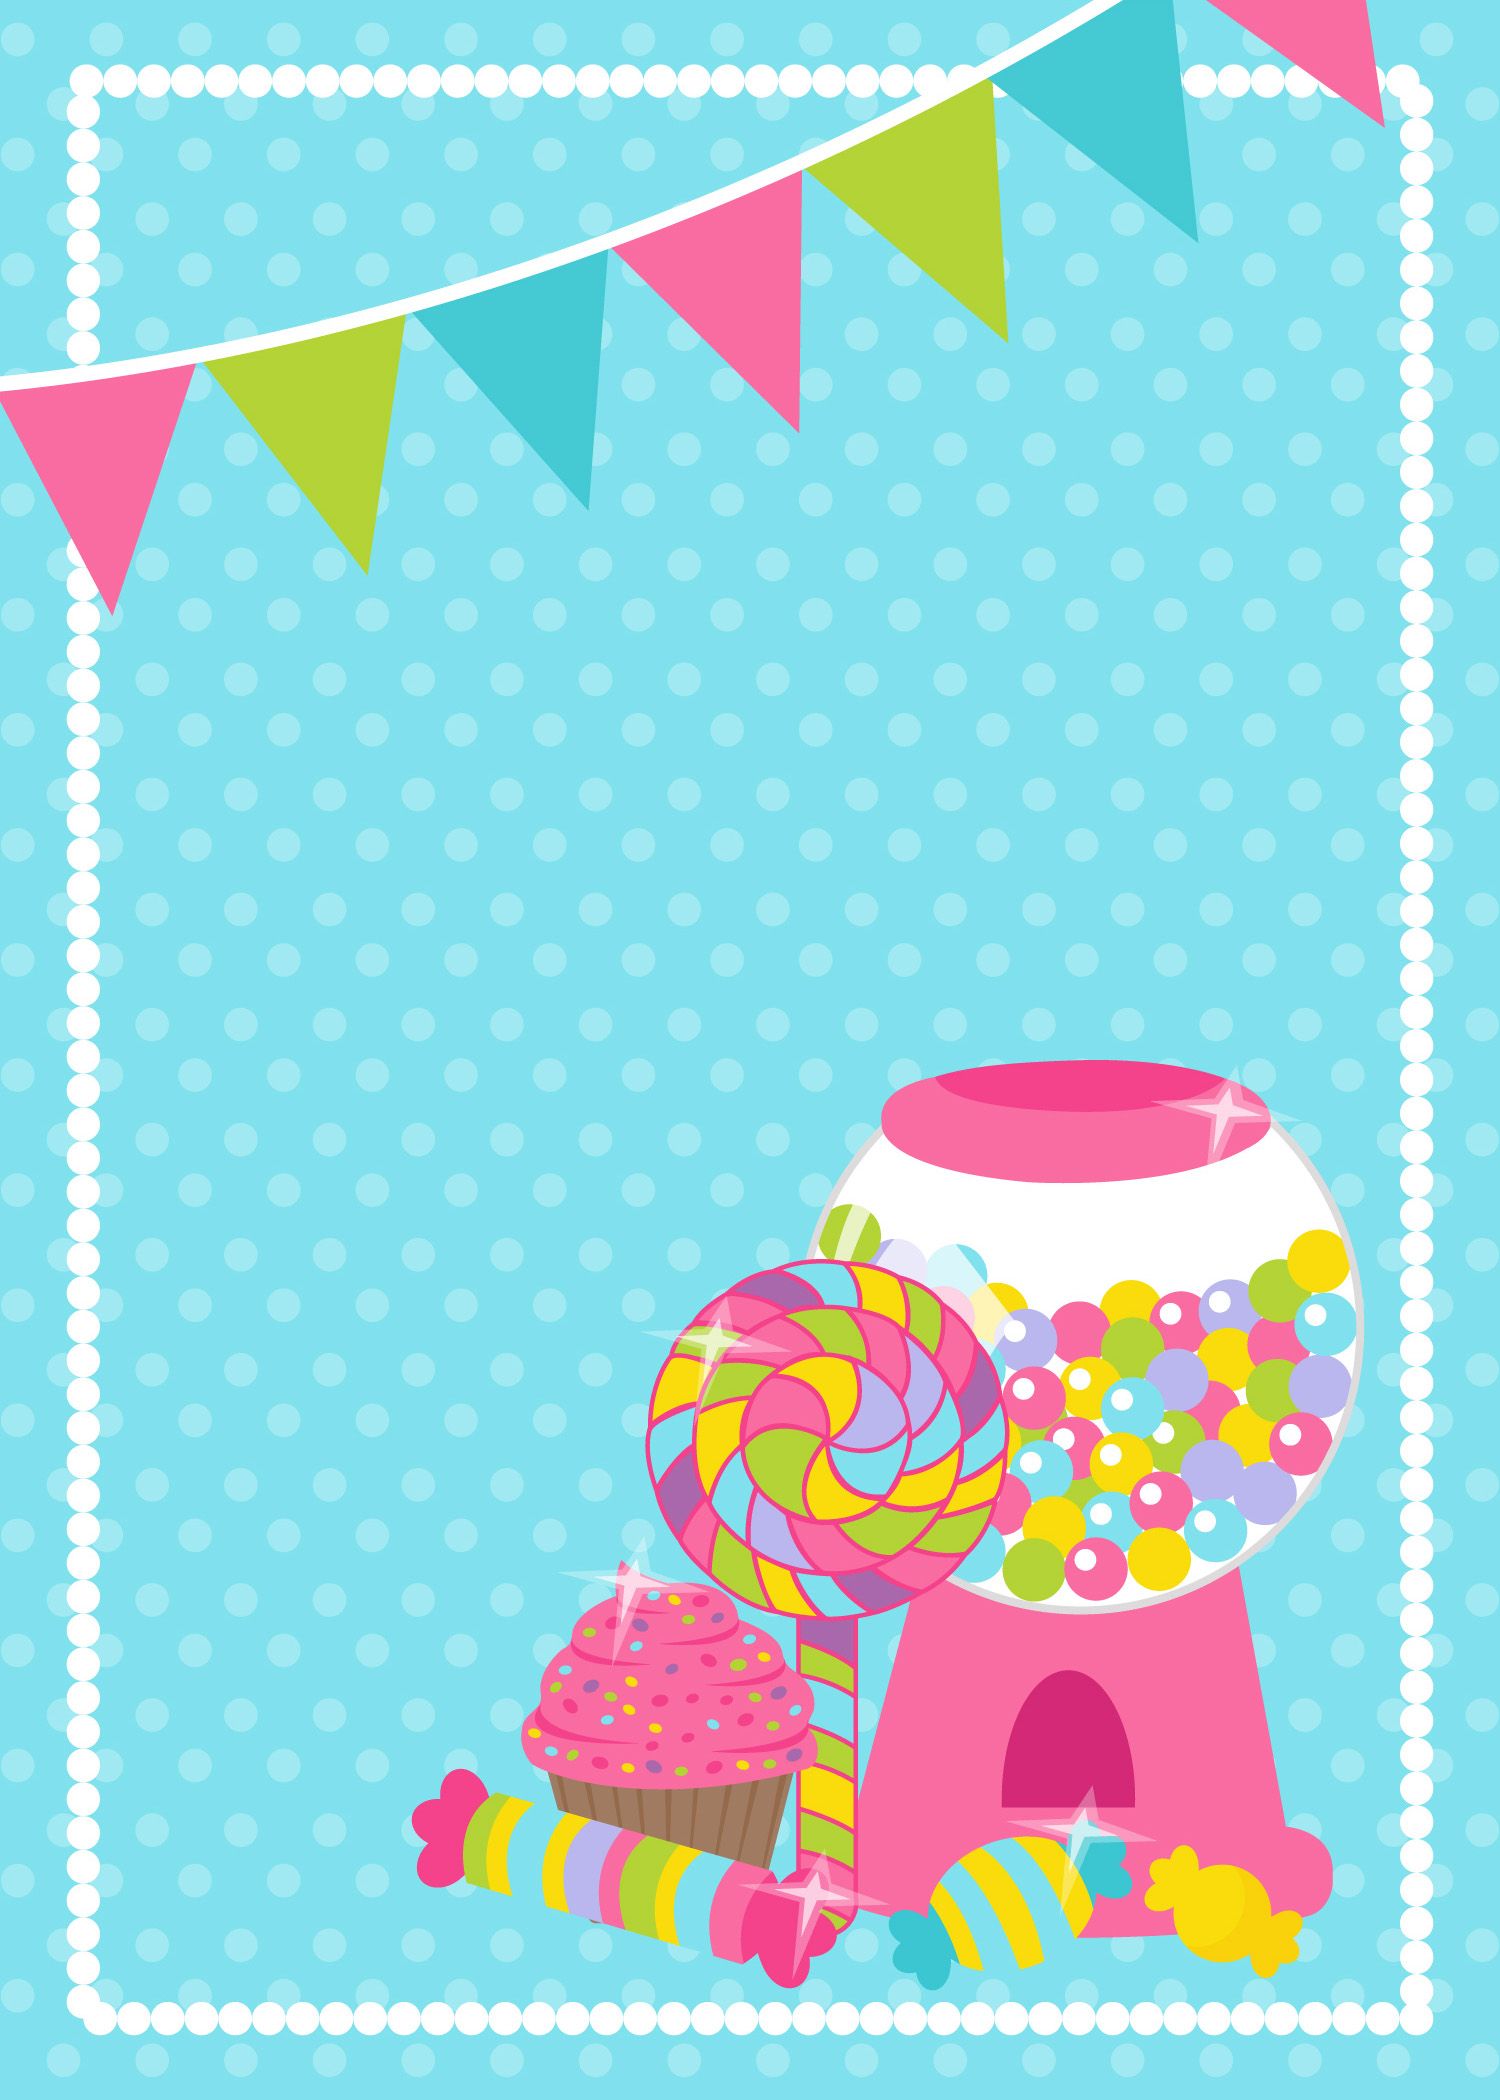 Candyland clipart cute. Cliparts pinterest candy land